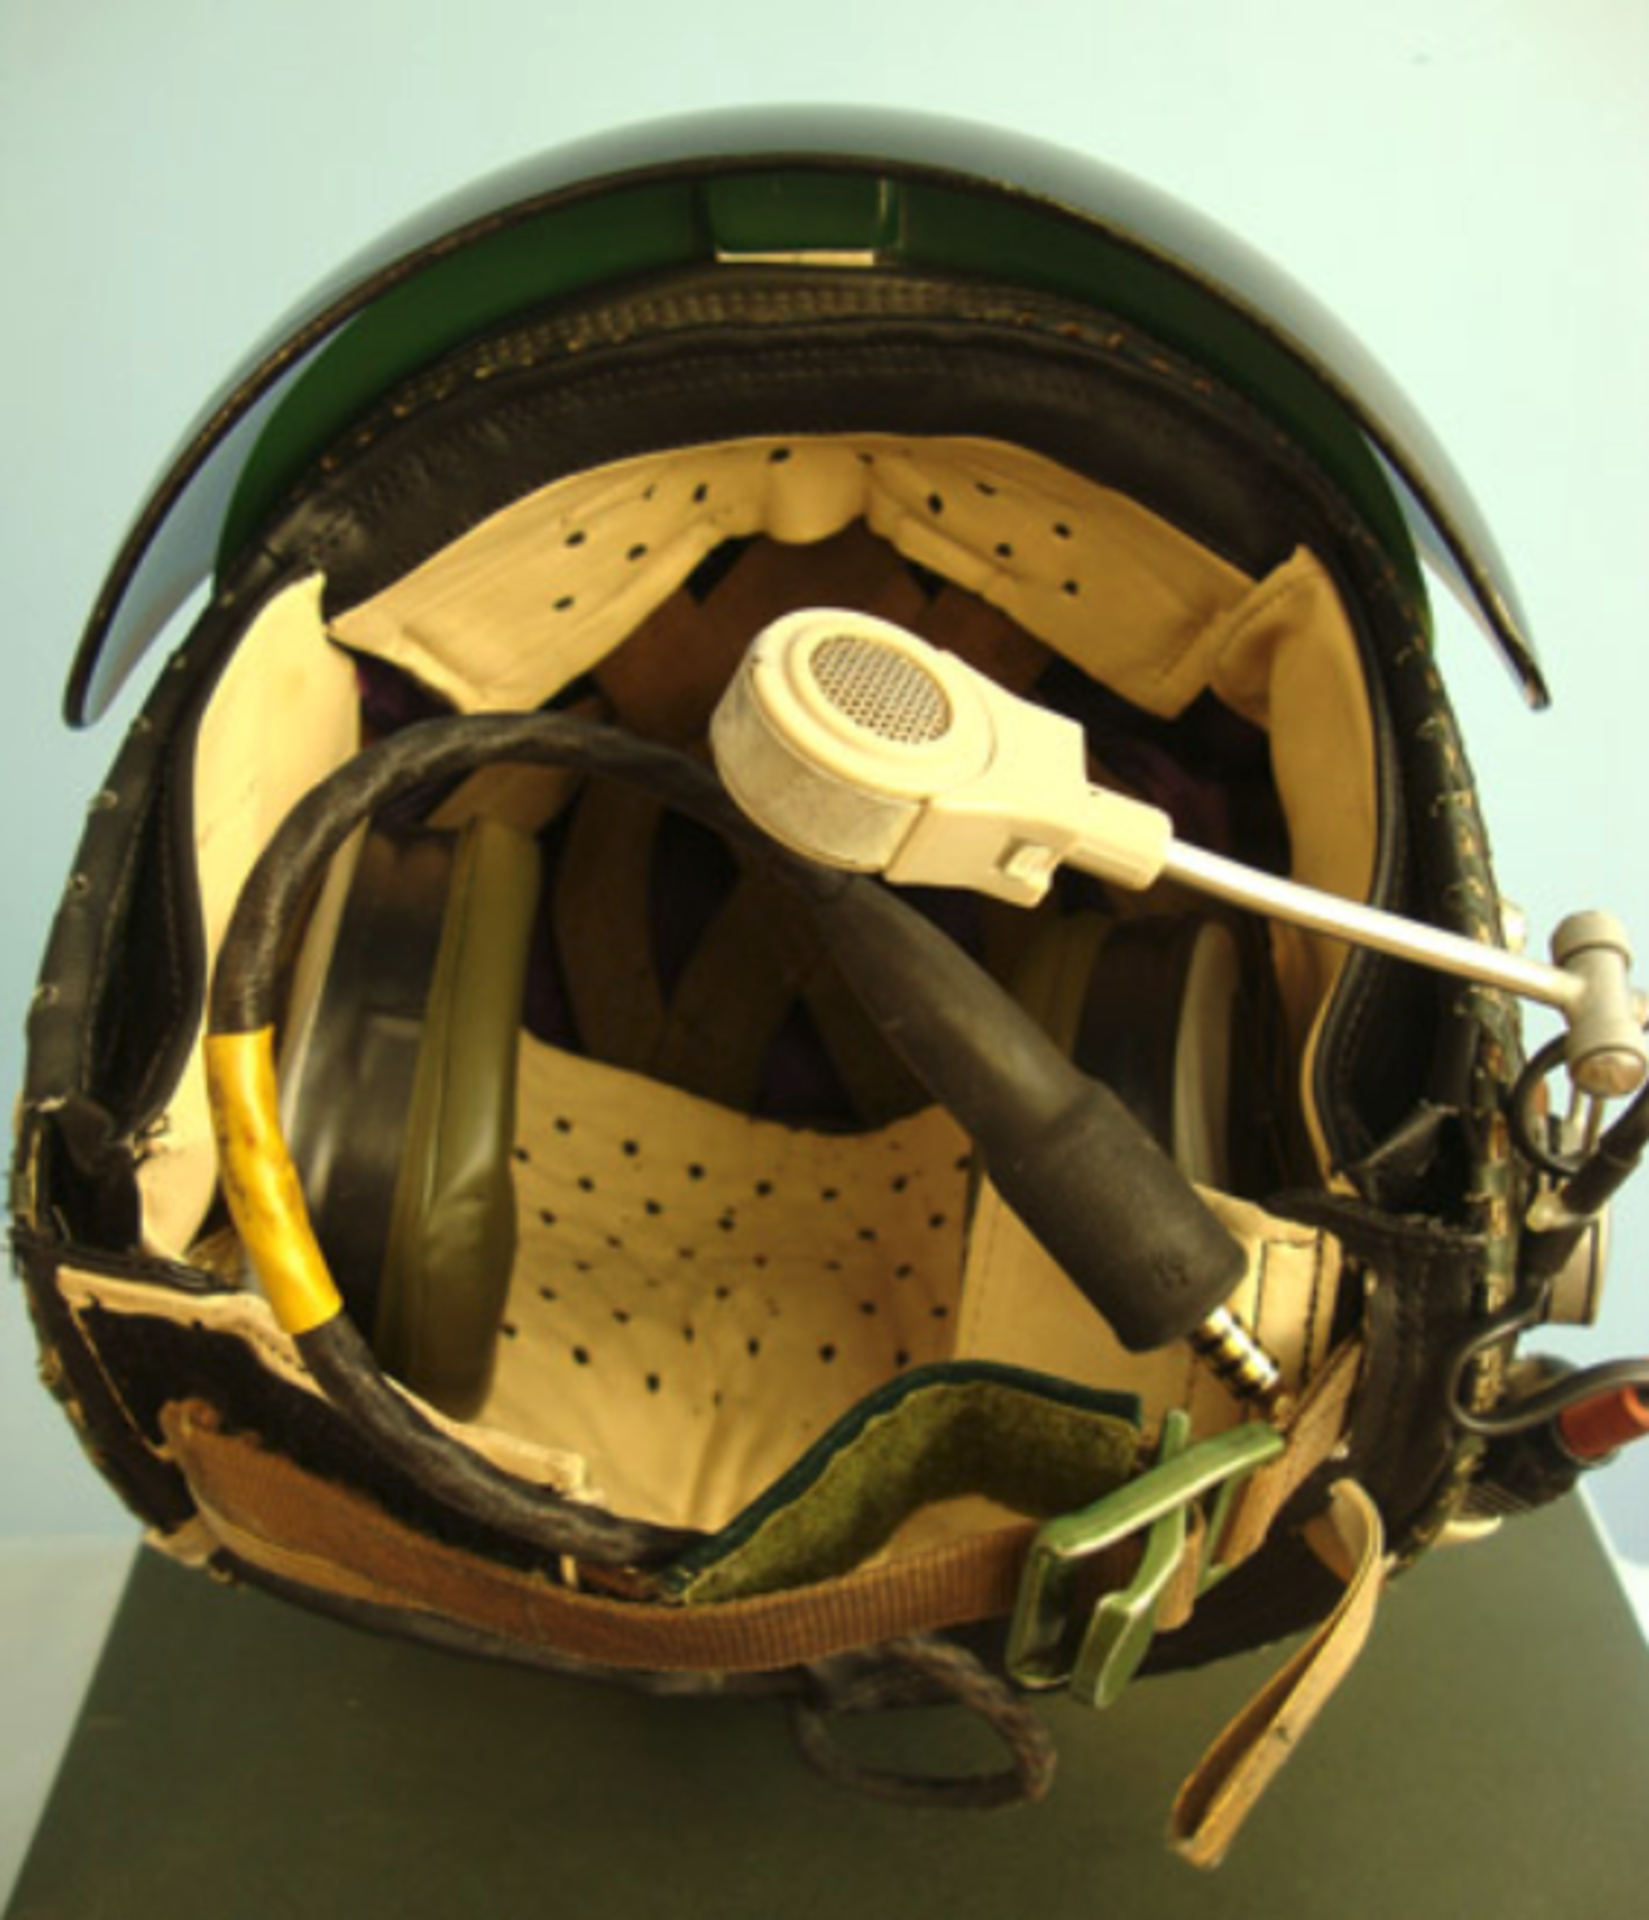 British R.A.F. Flying Helmet 'Bonedome' MK. 3A Complete with Visor, Headset, Mic & Box - Image 3 of 3